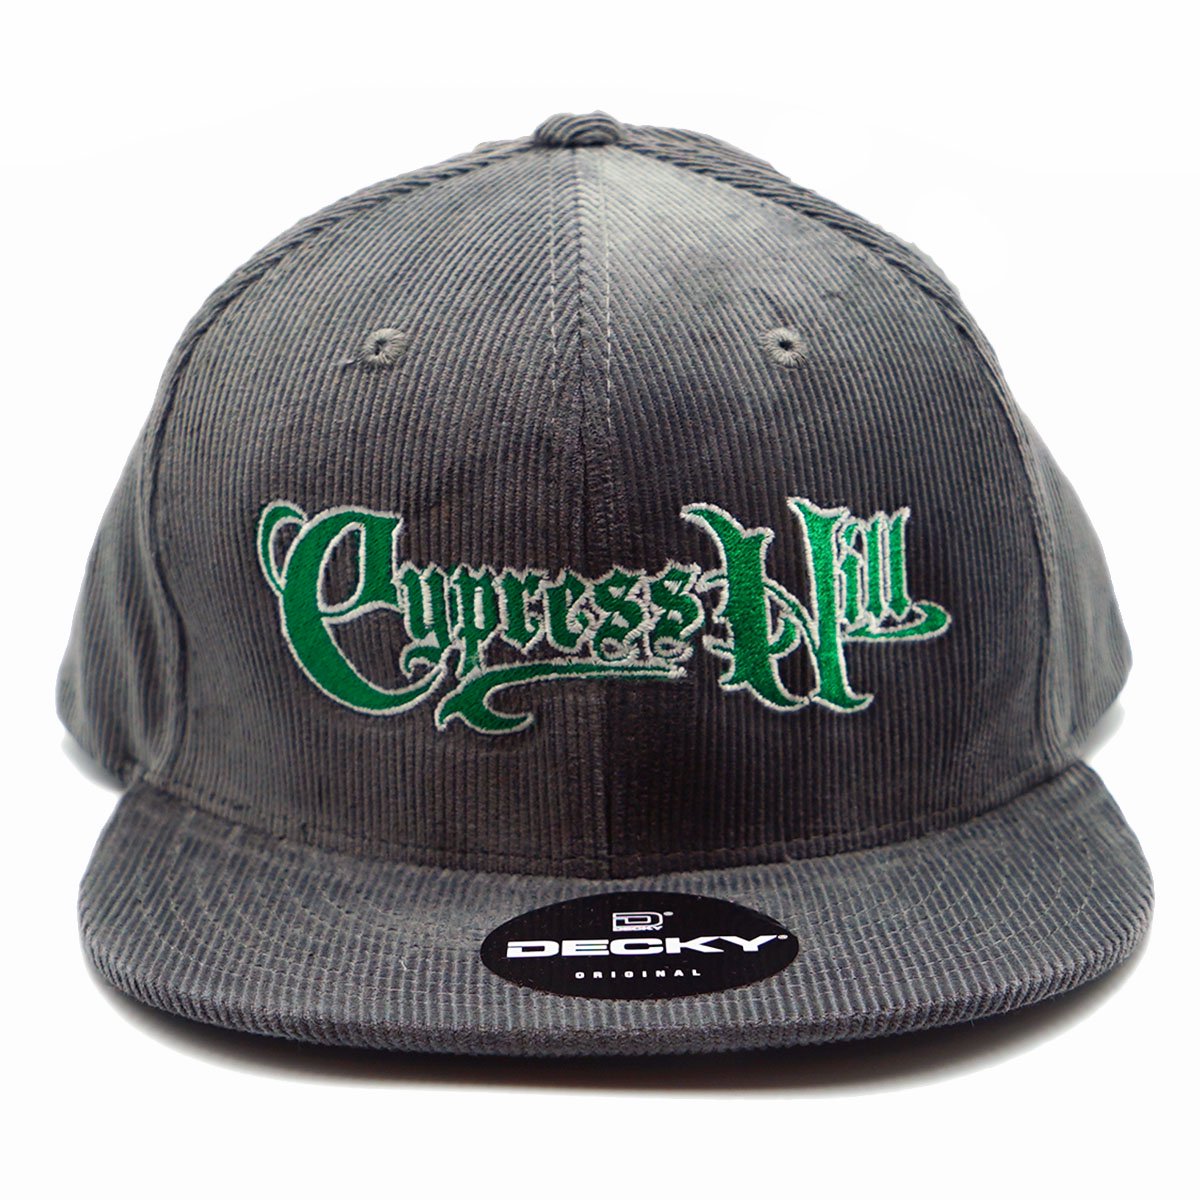 Fedup | HIPHOP WEAR | <img class='new_mark_img1' src='https://img.shop-pro.jp/img/new/icons30.gif' style='border:none;display:inline;margin:0px;padding:0px;width:auto;' />Cypress Hill 